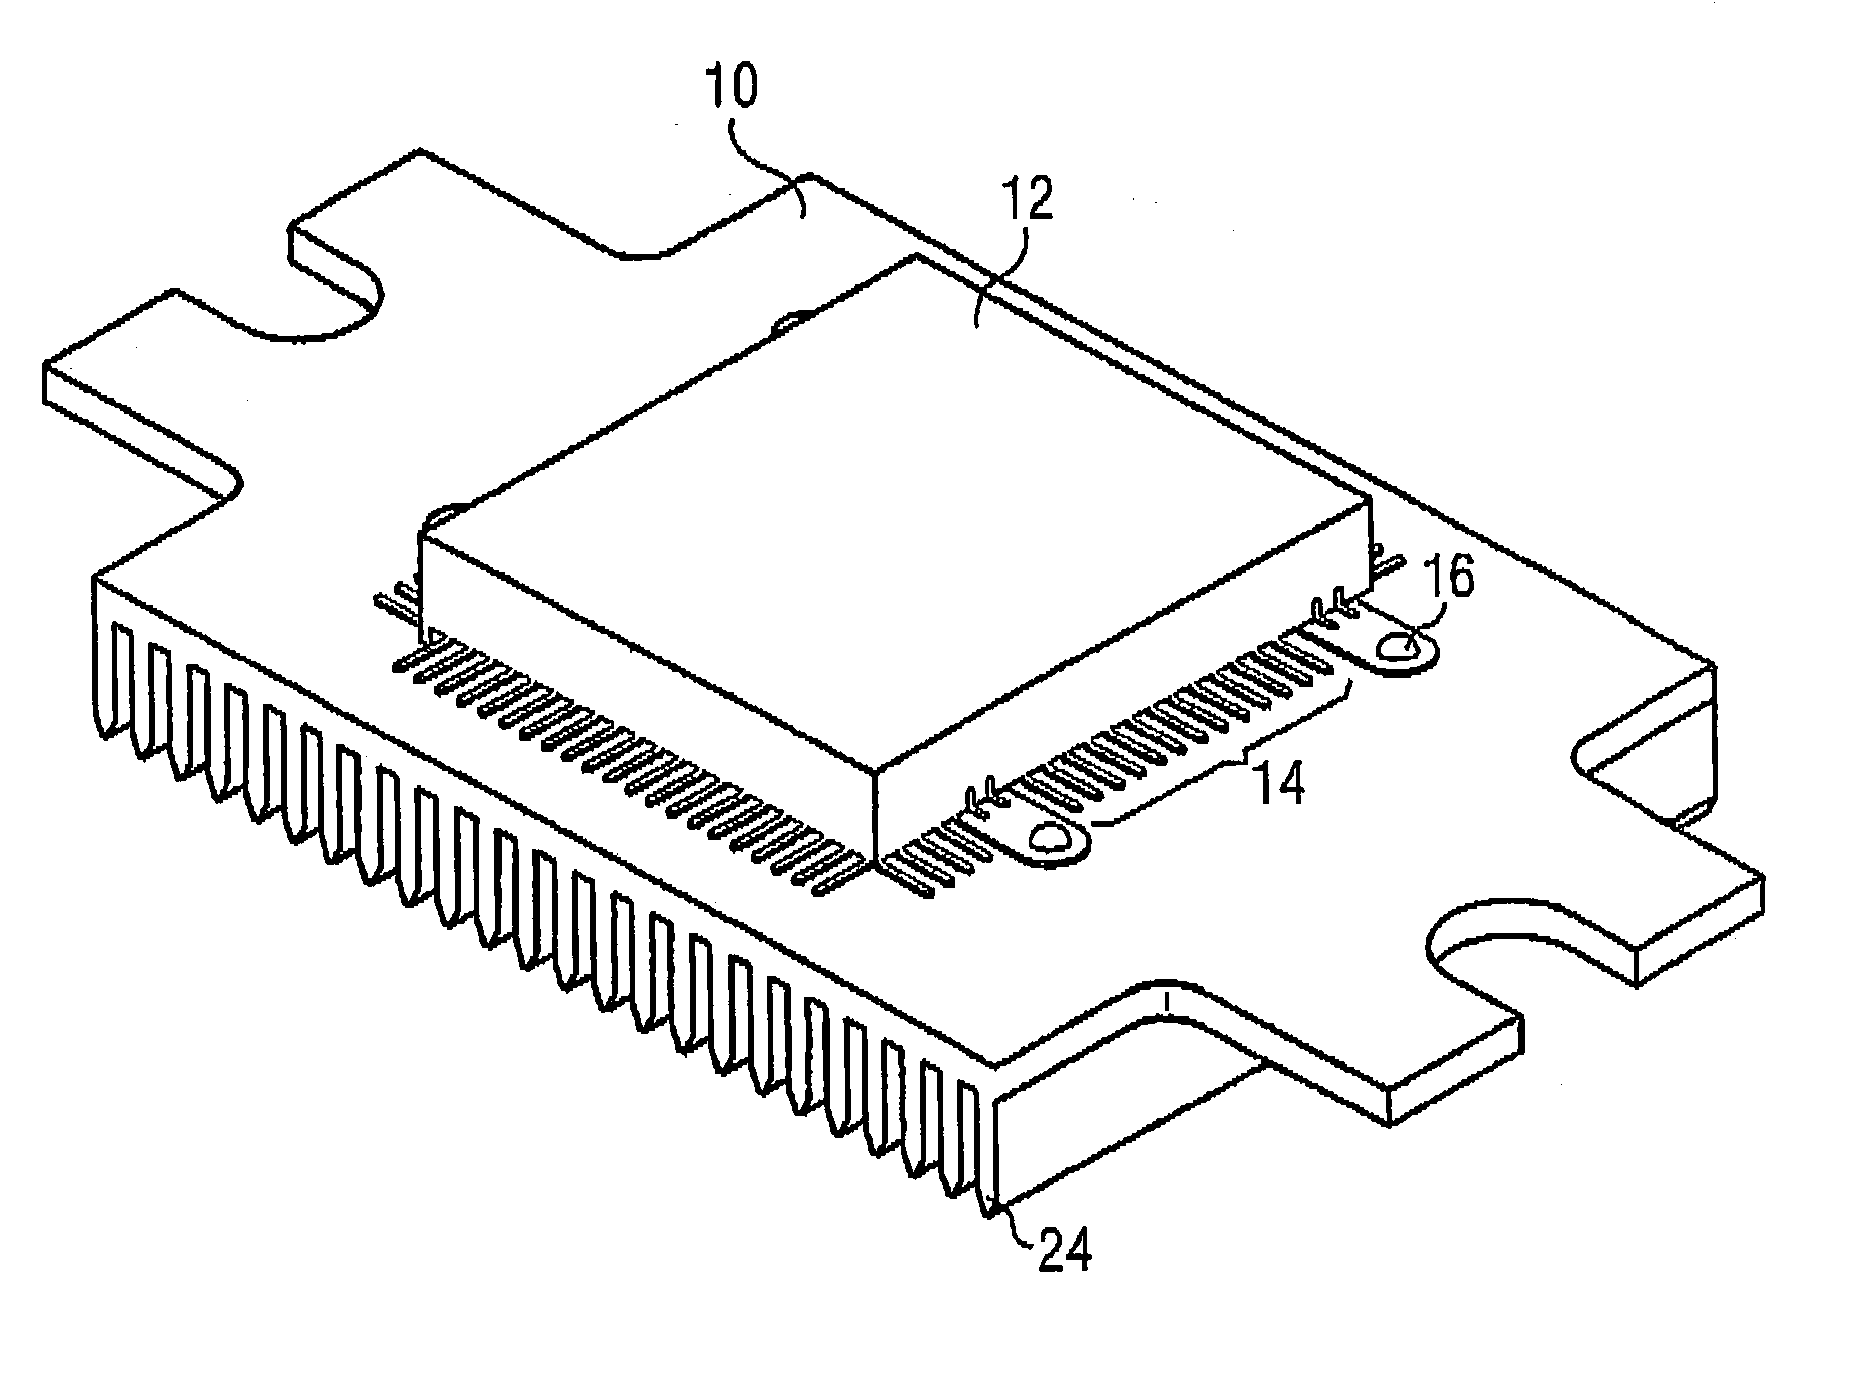 EMC shield and housing for electronic components